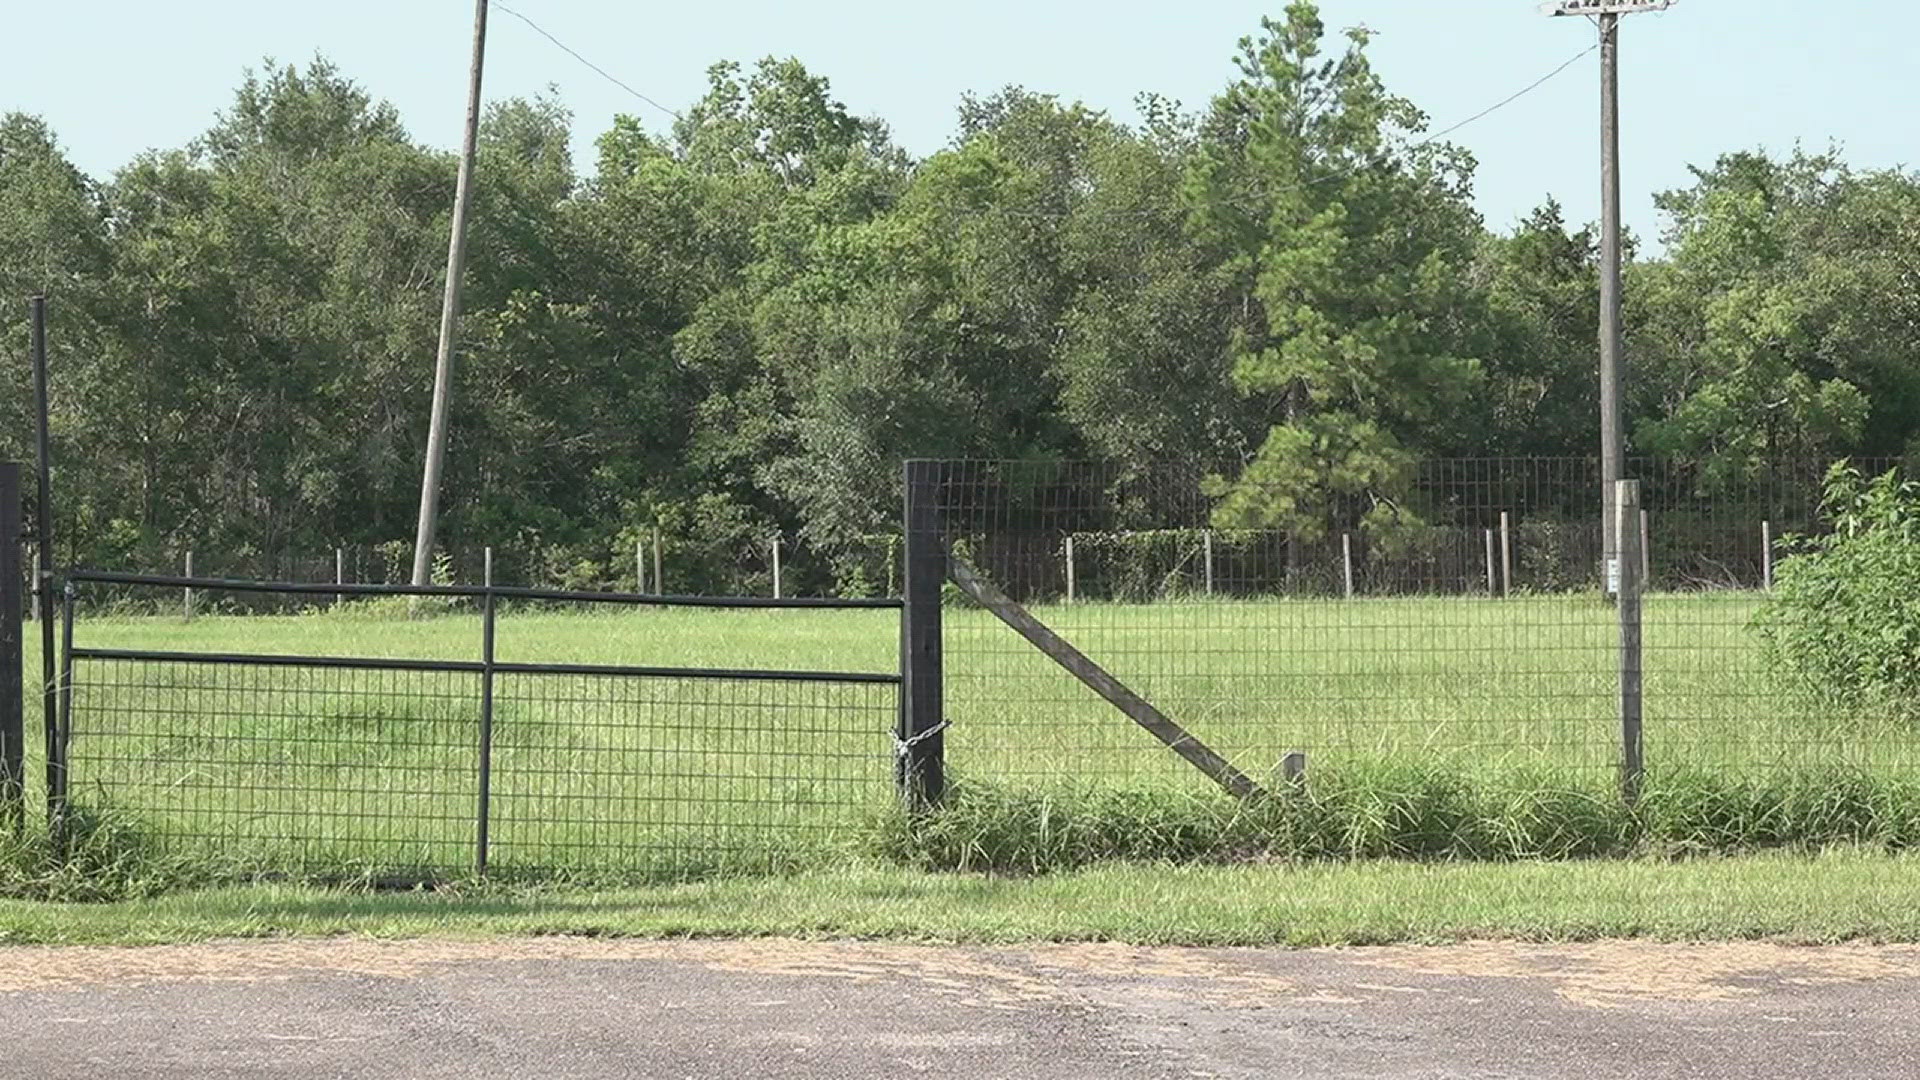 At issue in the lawsuit, filed against Drainage District Six, is a five acre piece of land that the district is currently excavating on to build a detention basin.